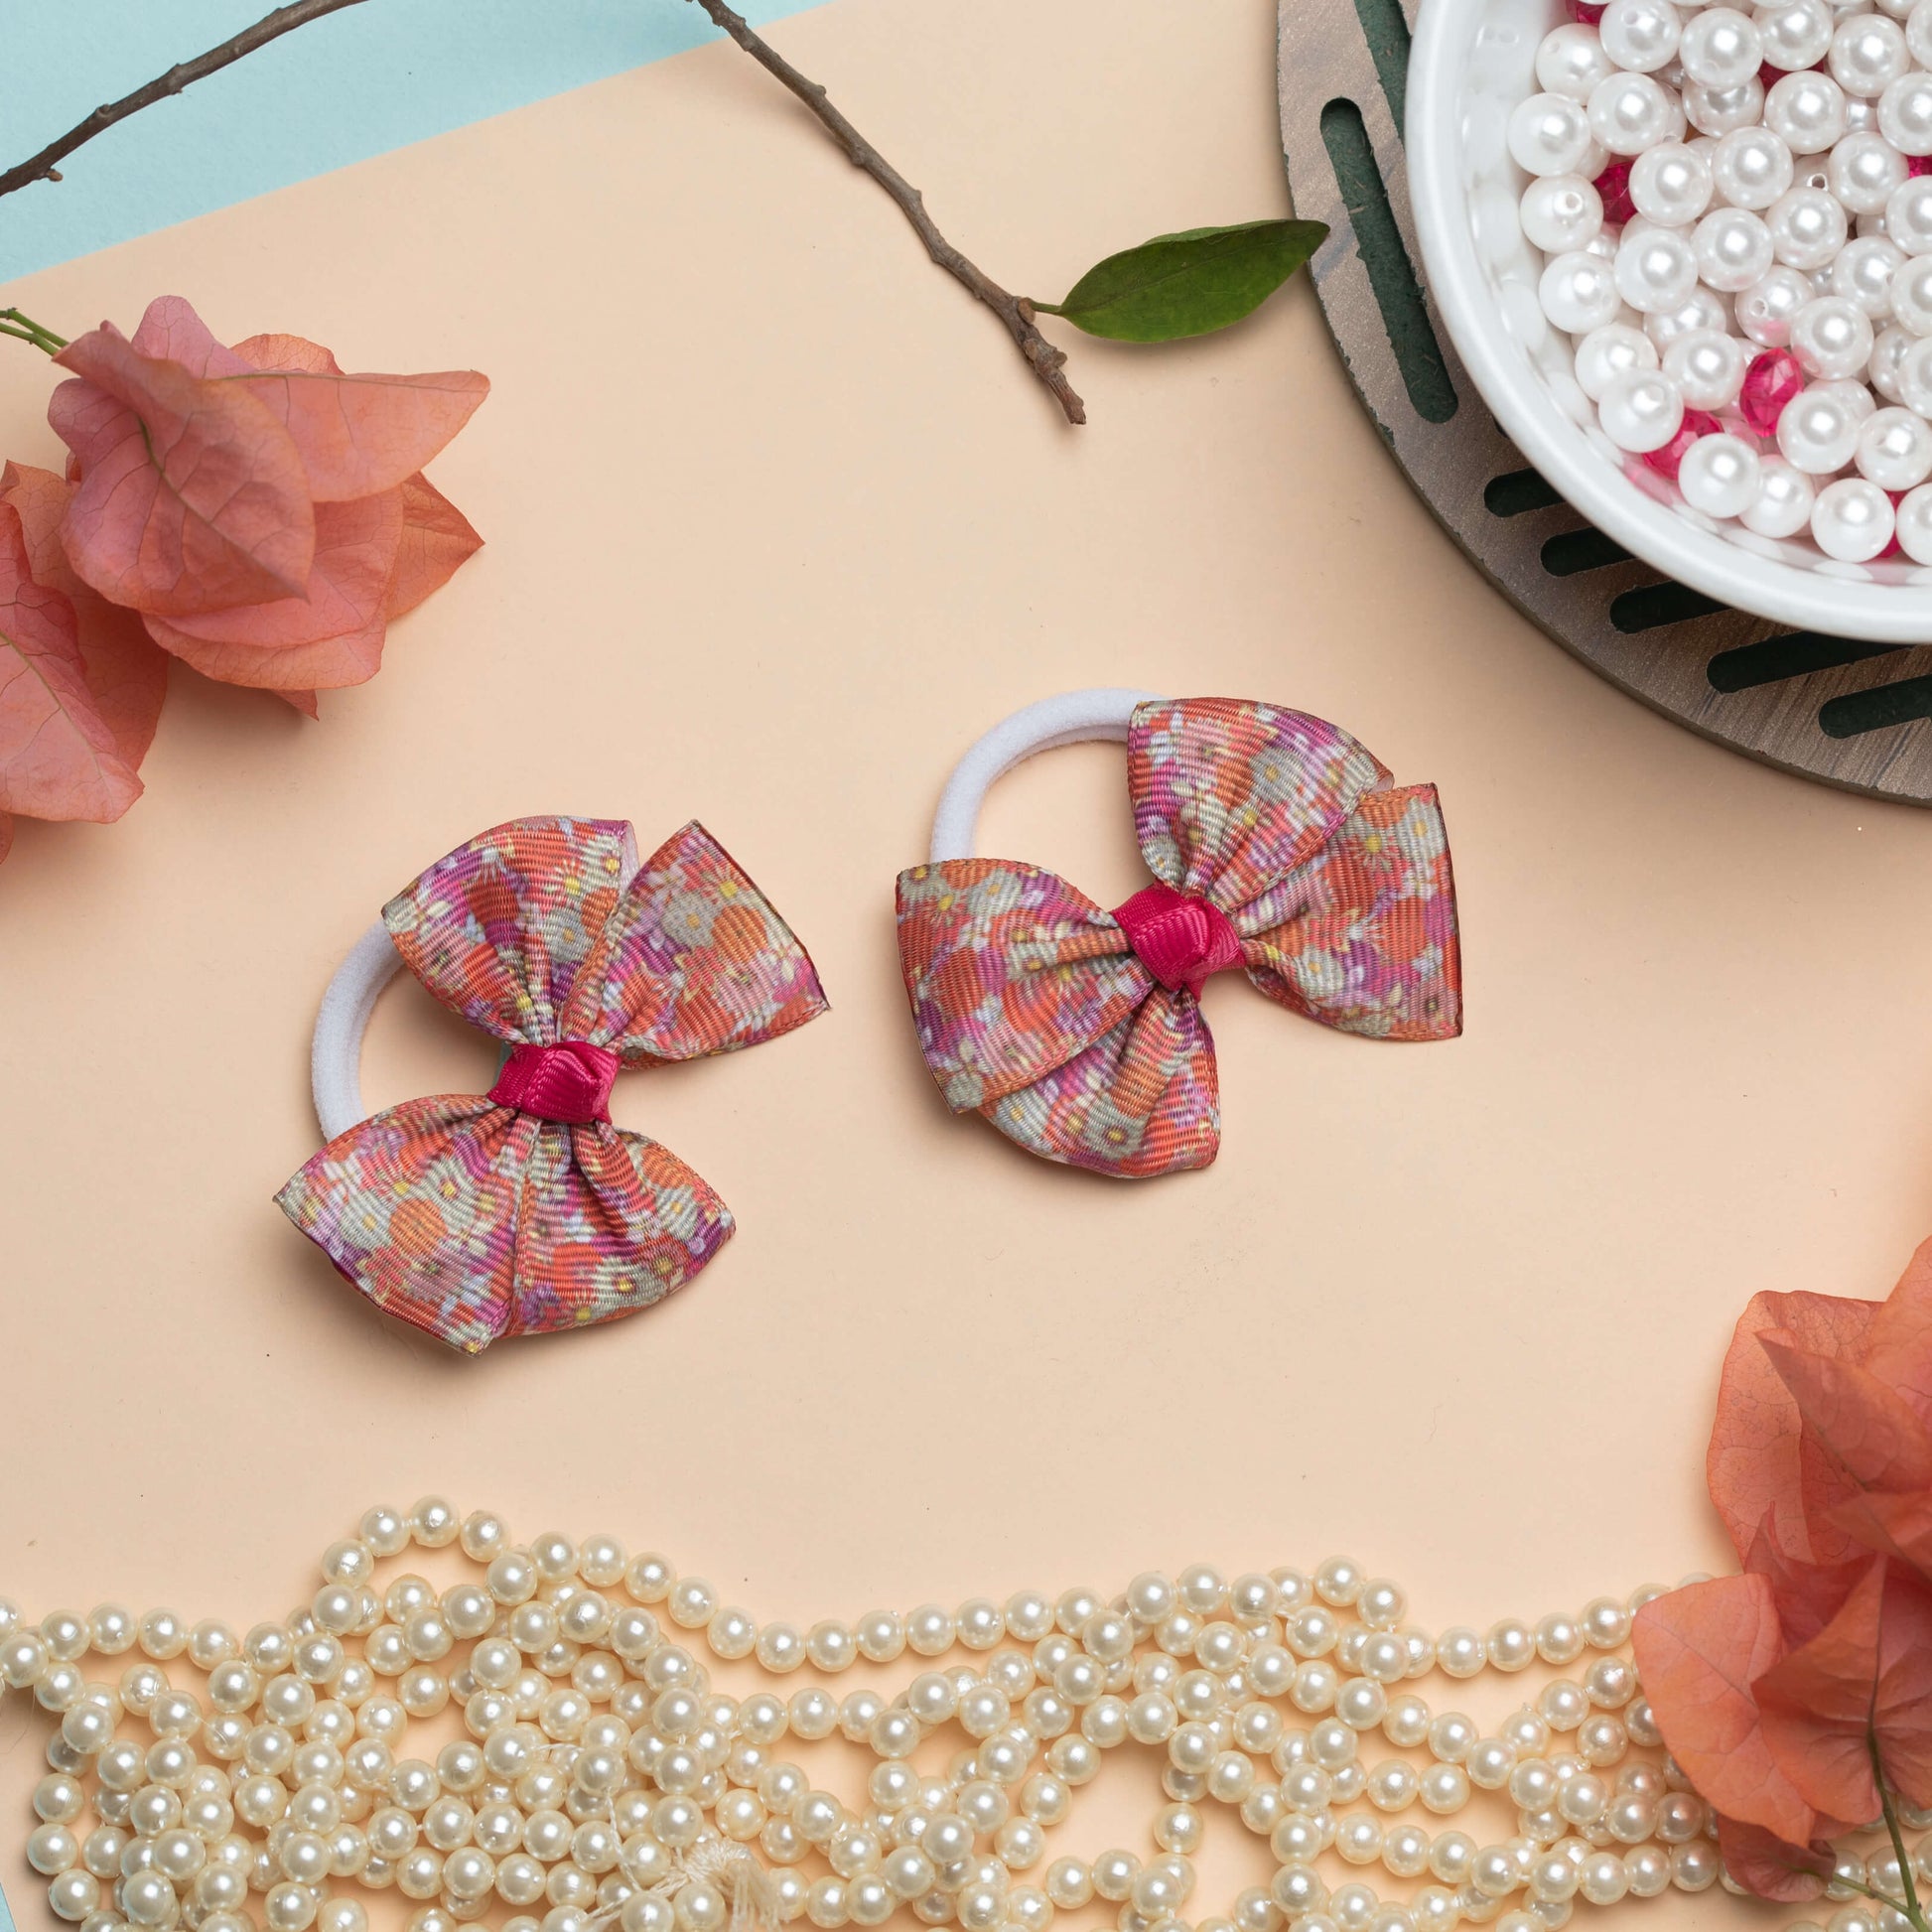 Ribbon Candy - Floral Print Bow on Rubber Band - Pink